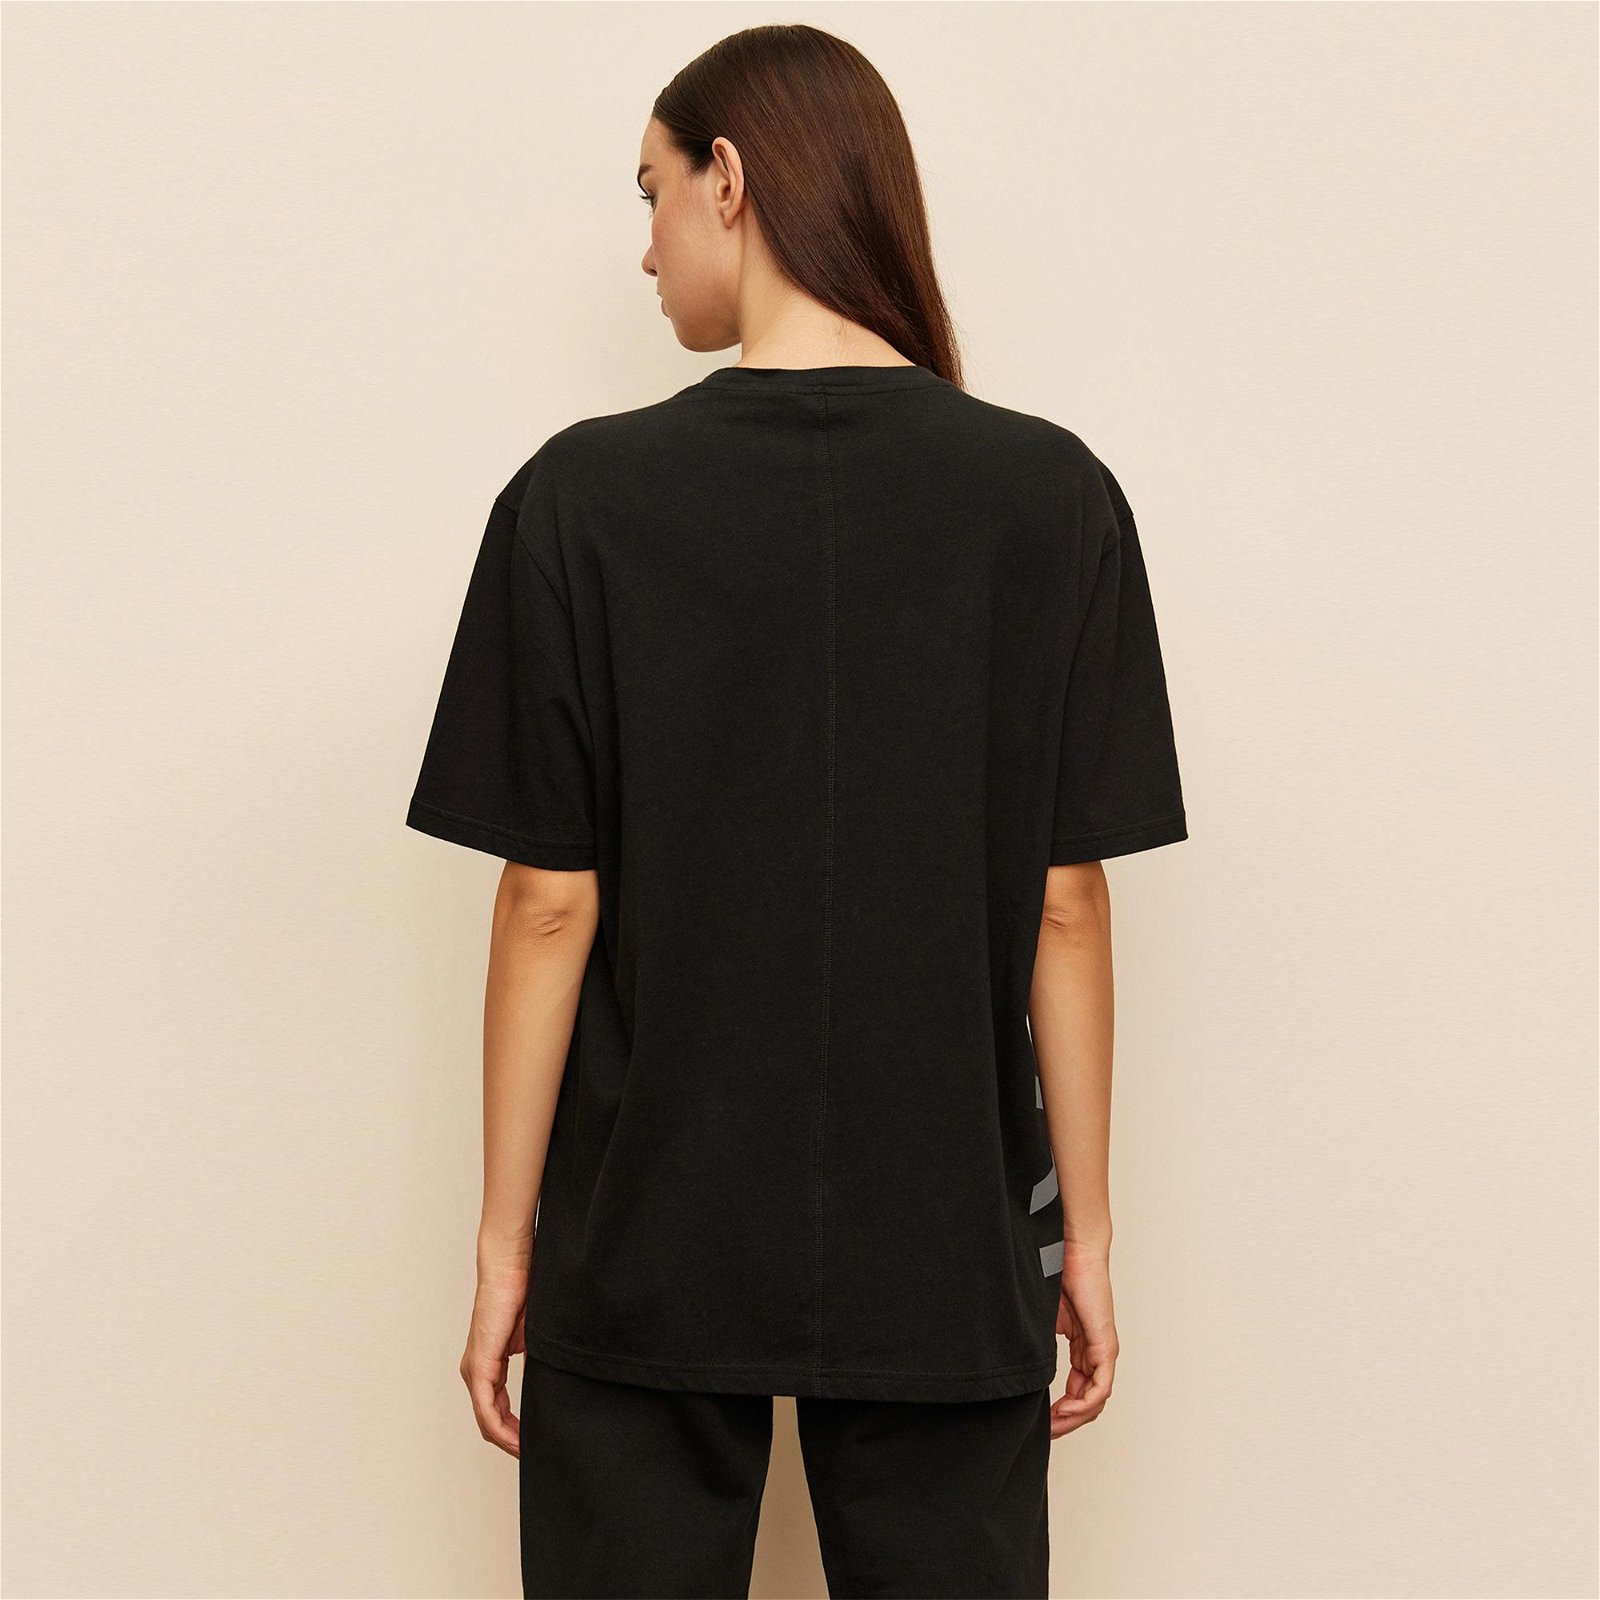 The Stay Line Soley Unisex Siyah T-Shirt